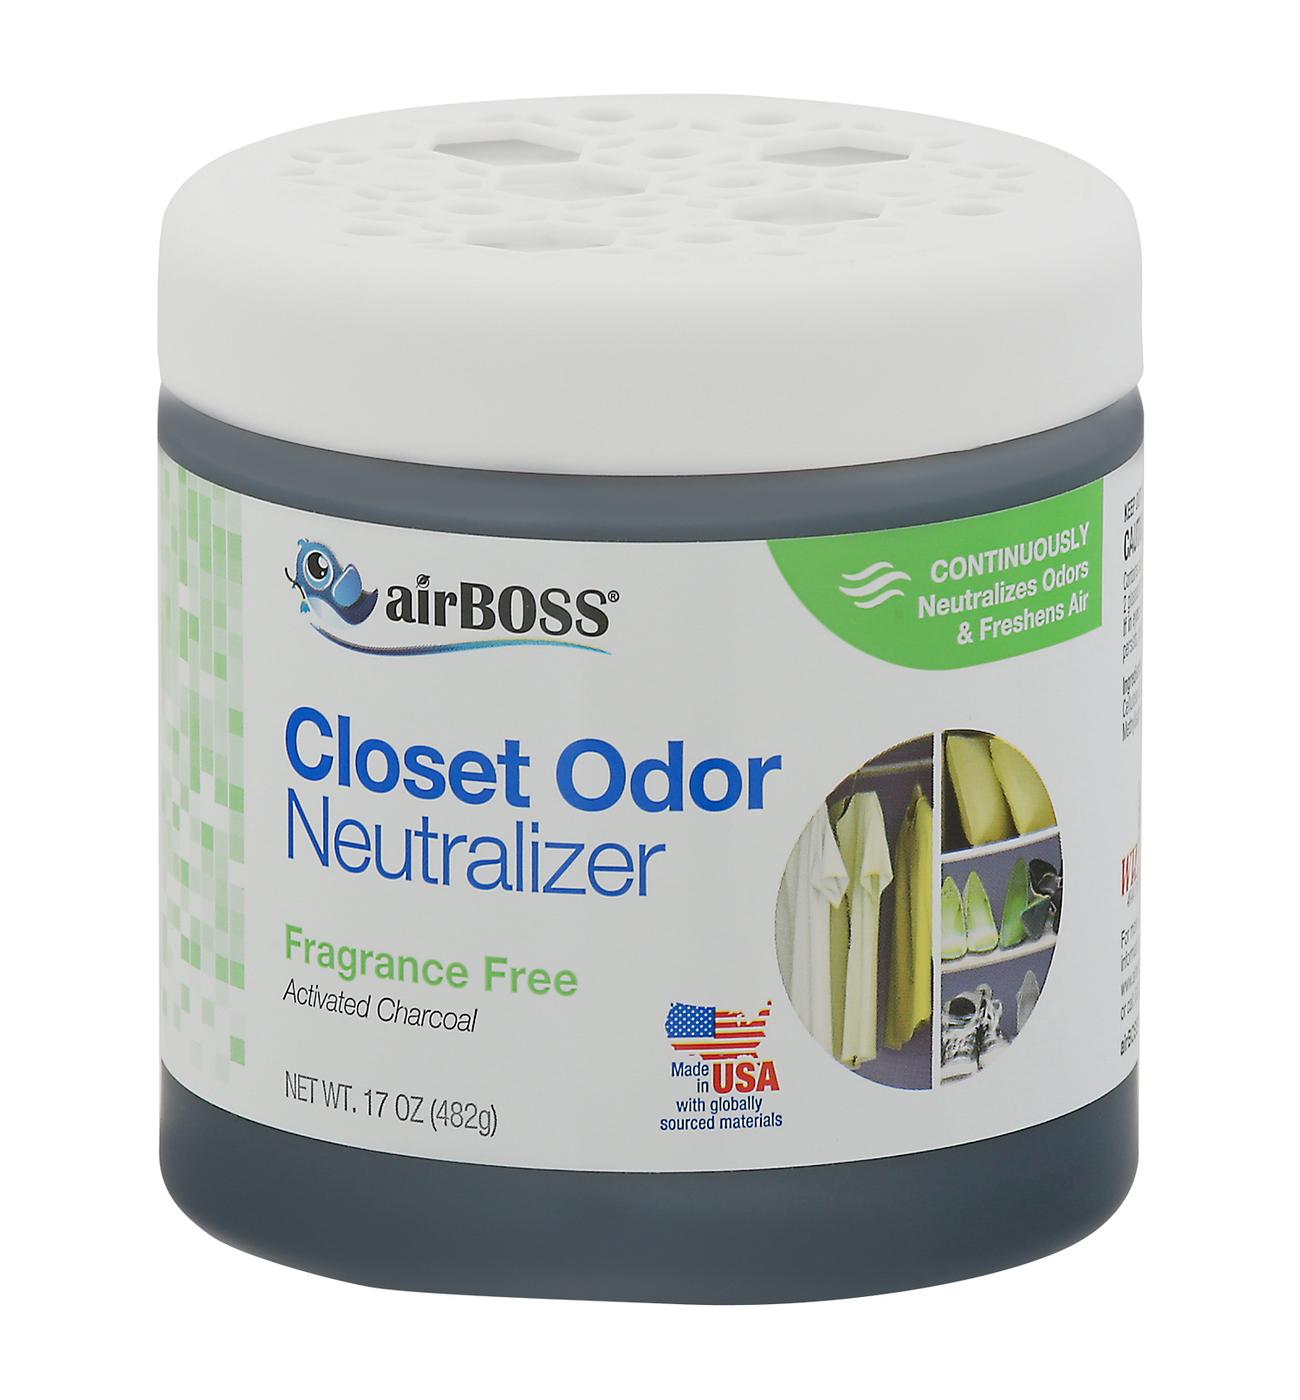 airBOSS Closet Odor Neutralizer - Fragrance Free; image 1 of 2